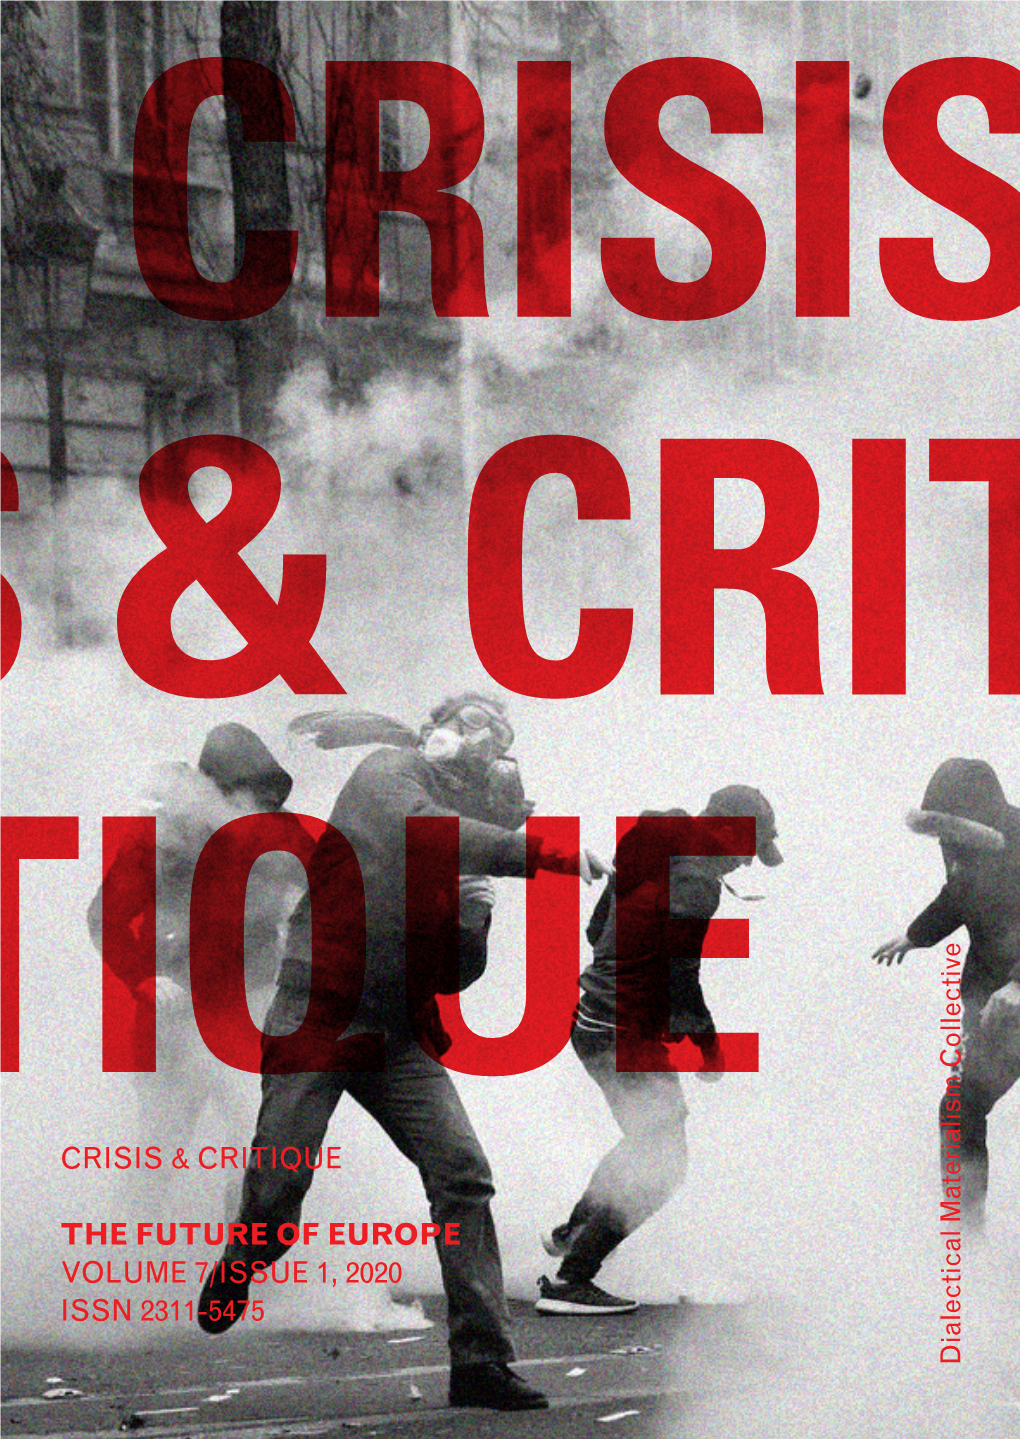 Crisis & Critique the Future of Europe Volume 7/Issue 1, 2020 Issn 2311-5475